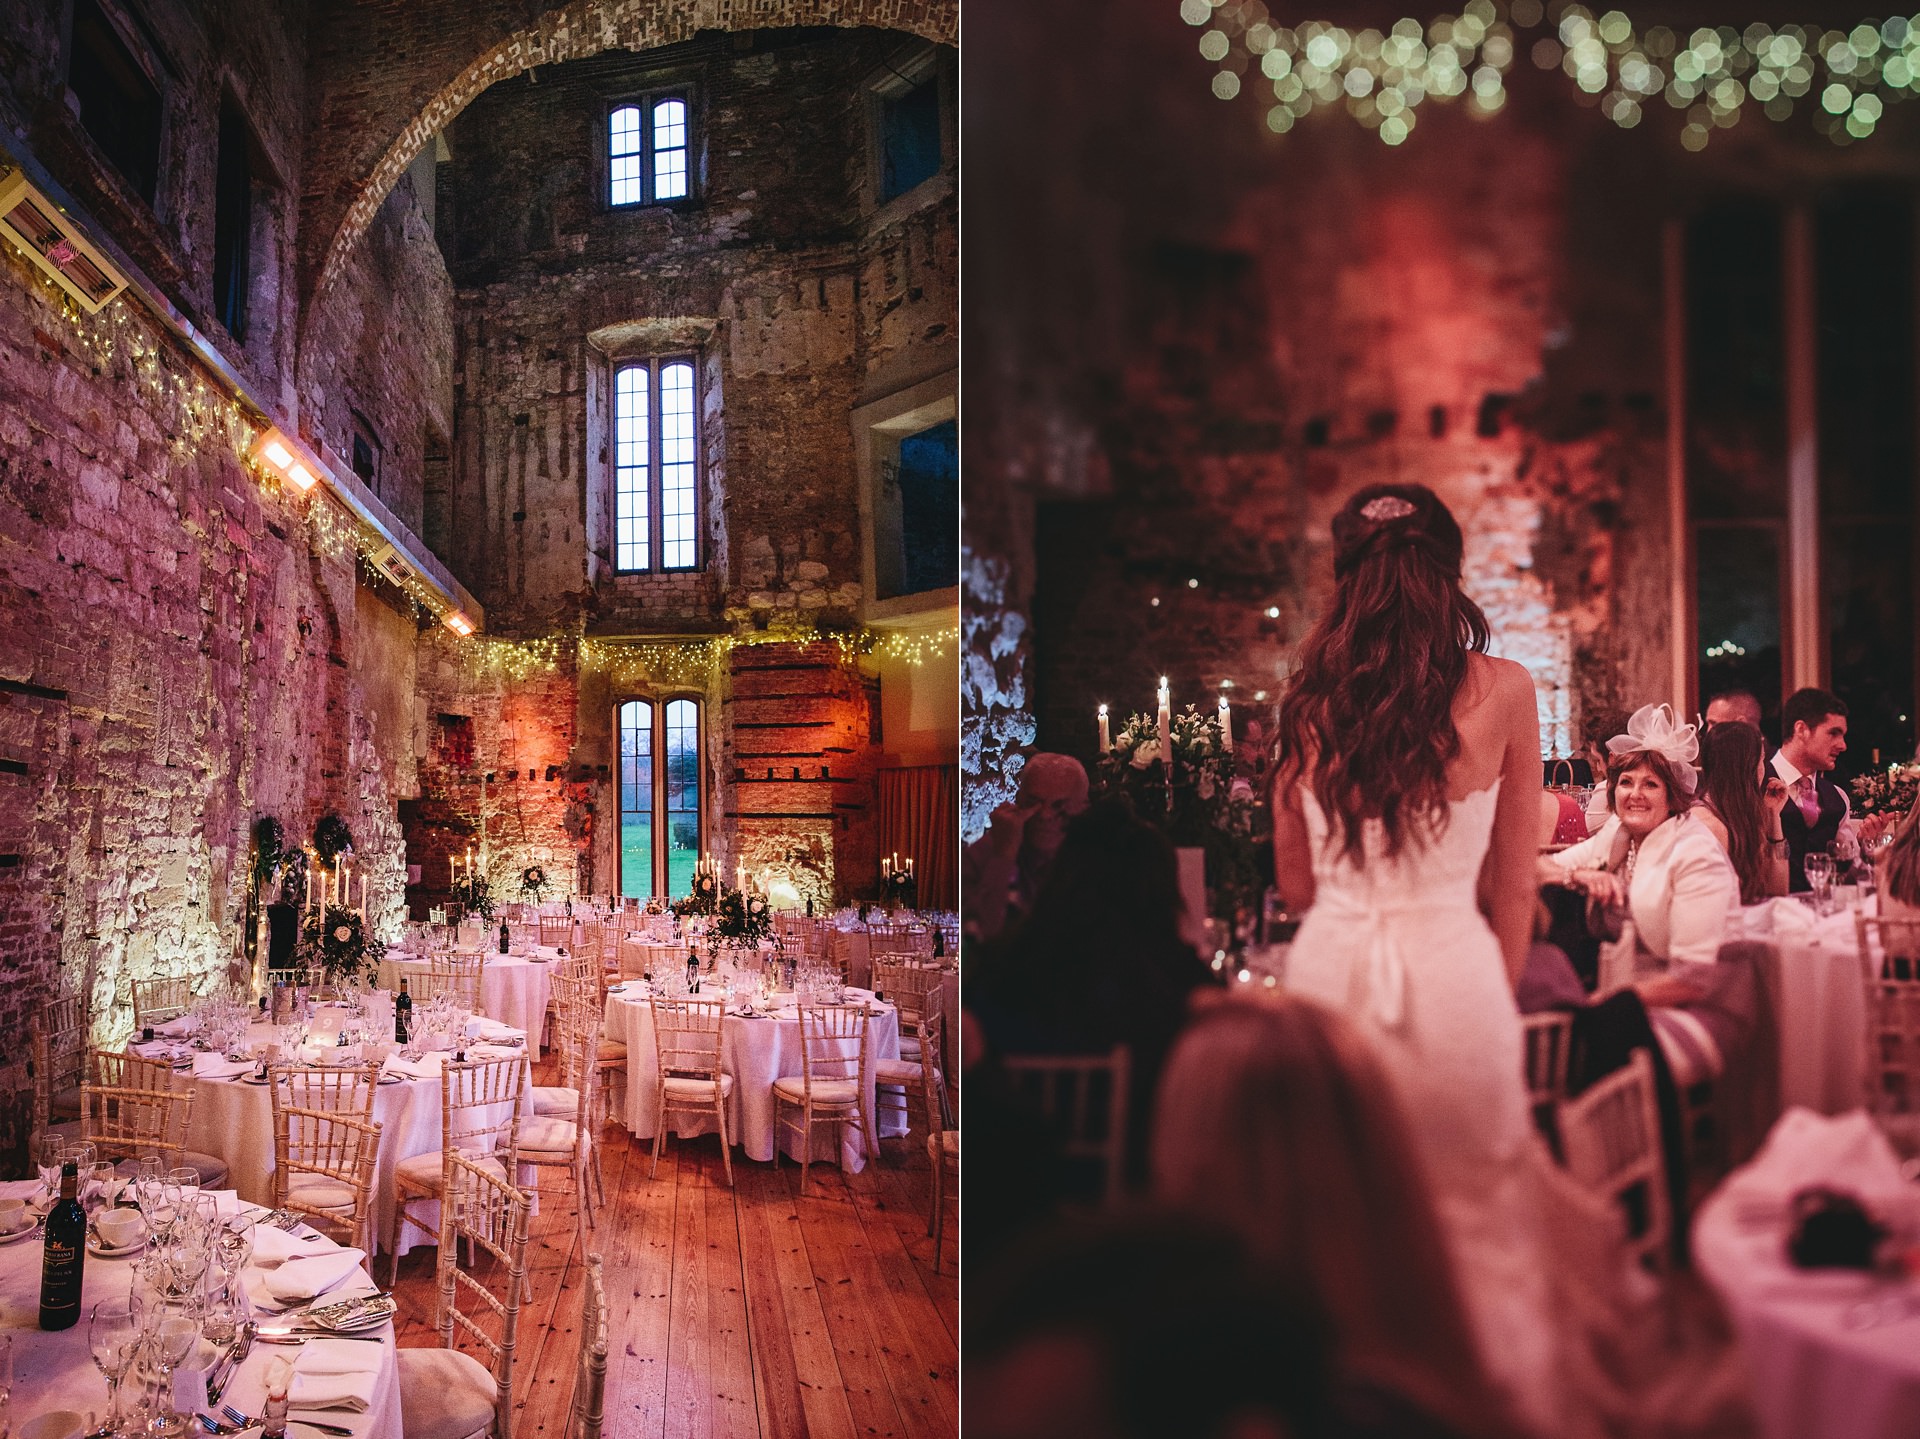 Lulworth Castle decorated for a winter wedding, with candles, fairy lights and pink lighting